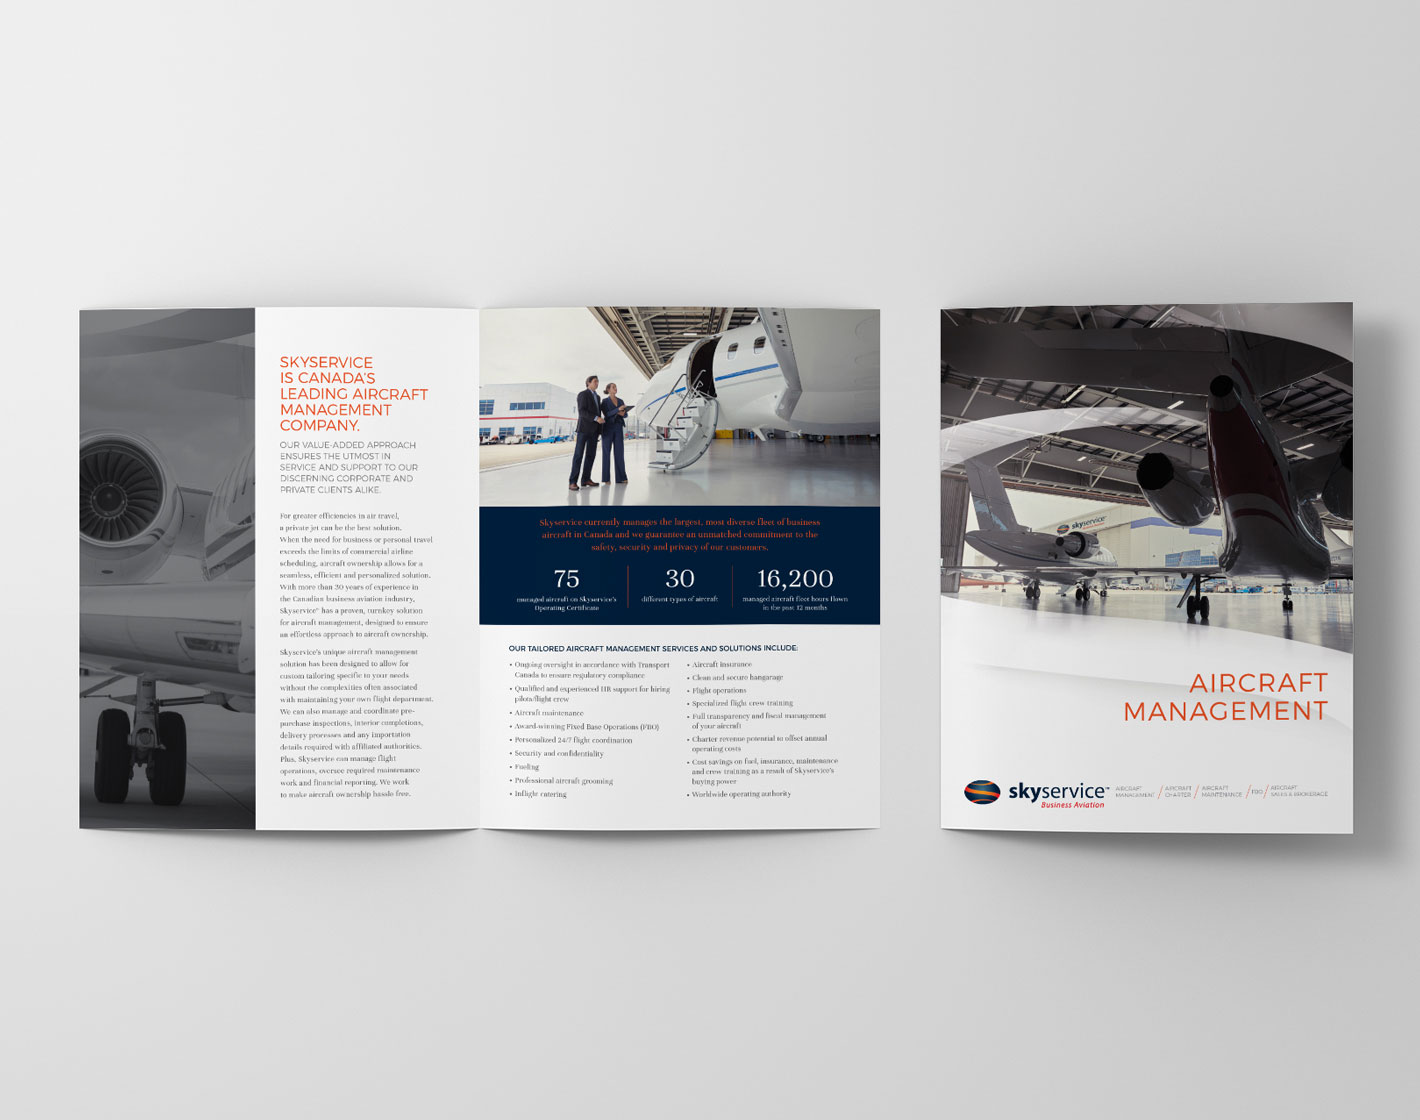 Skyservice aircraft management services brochure laid out on a table